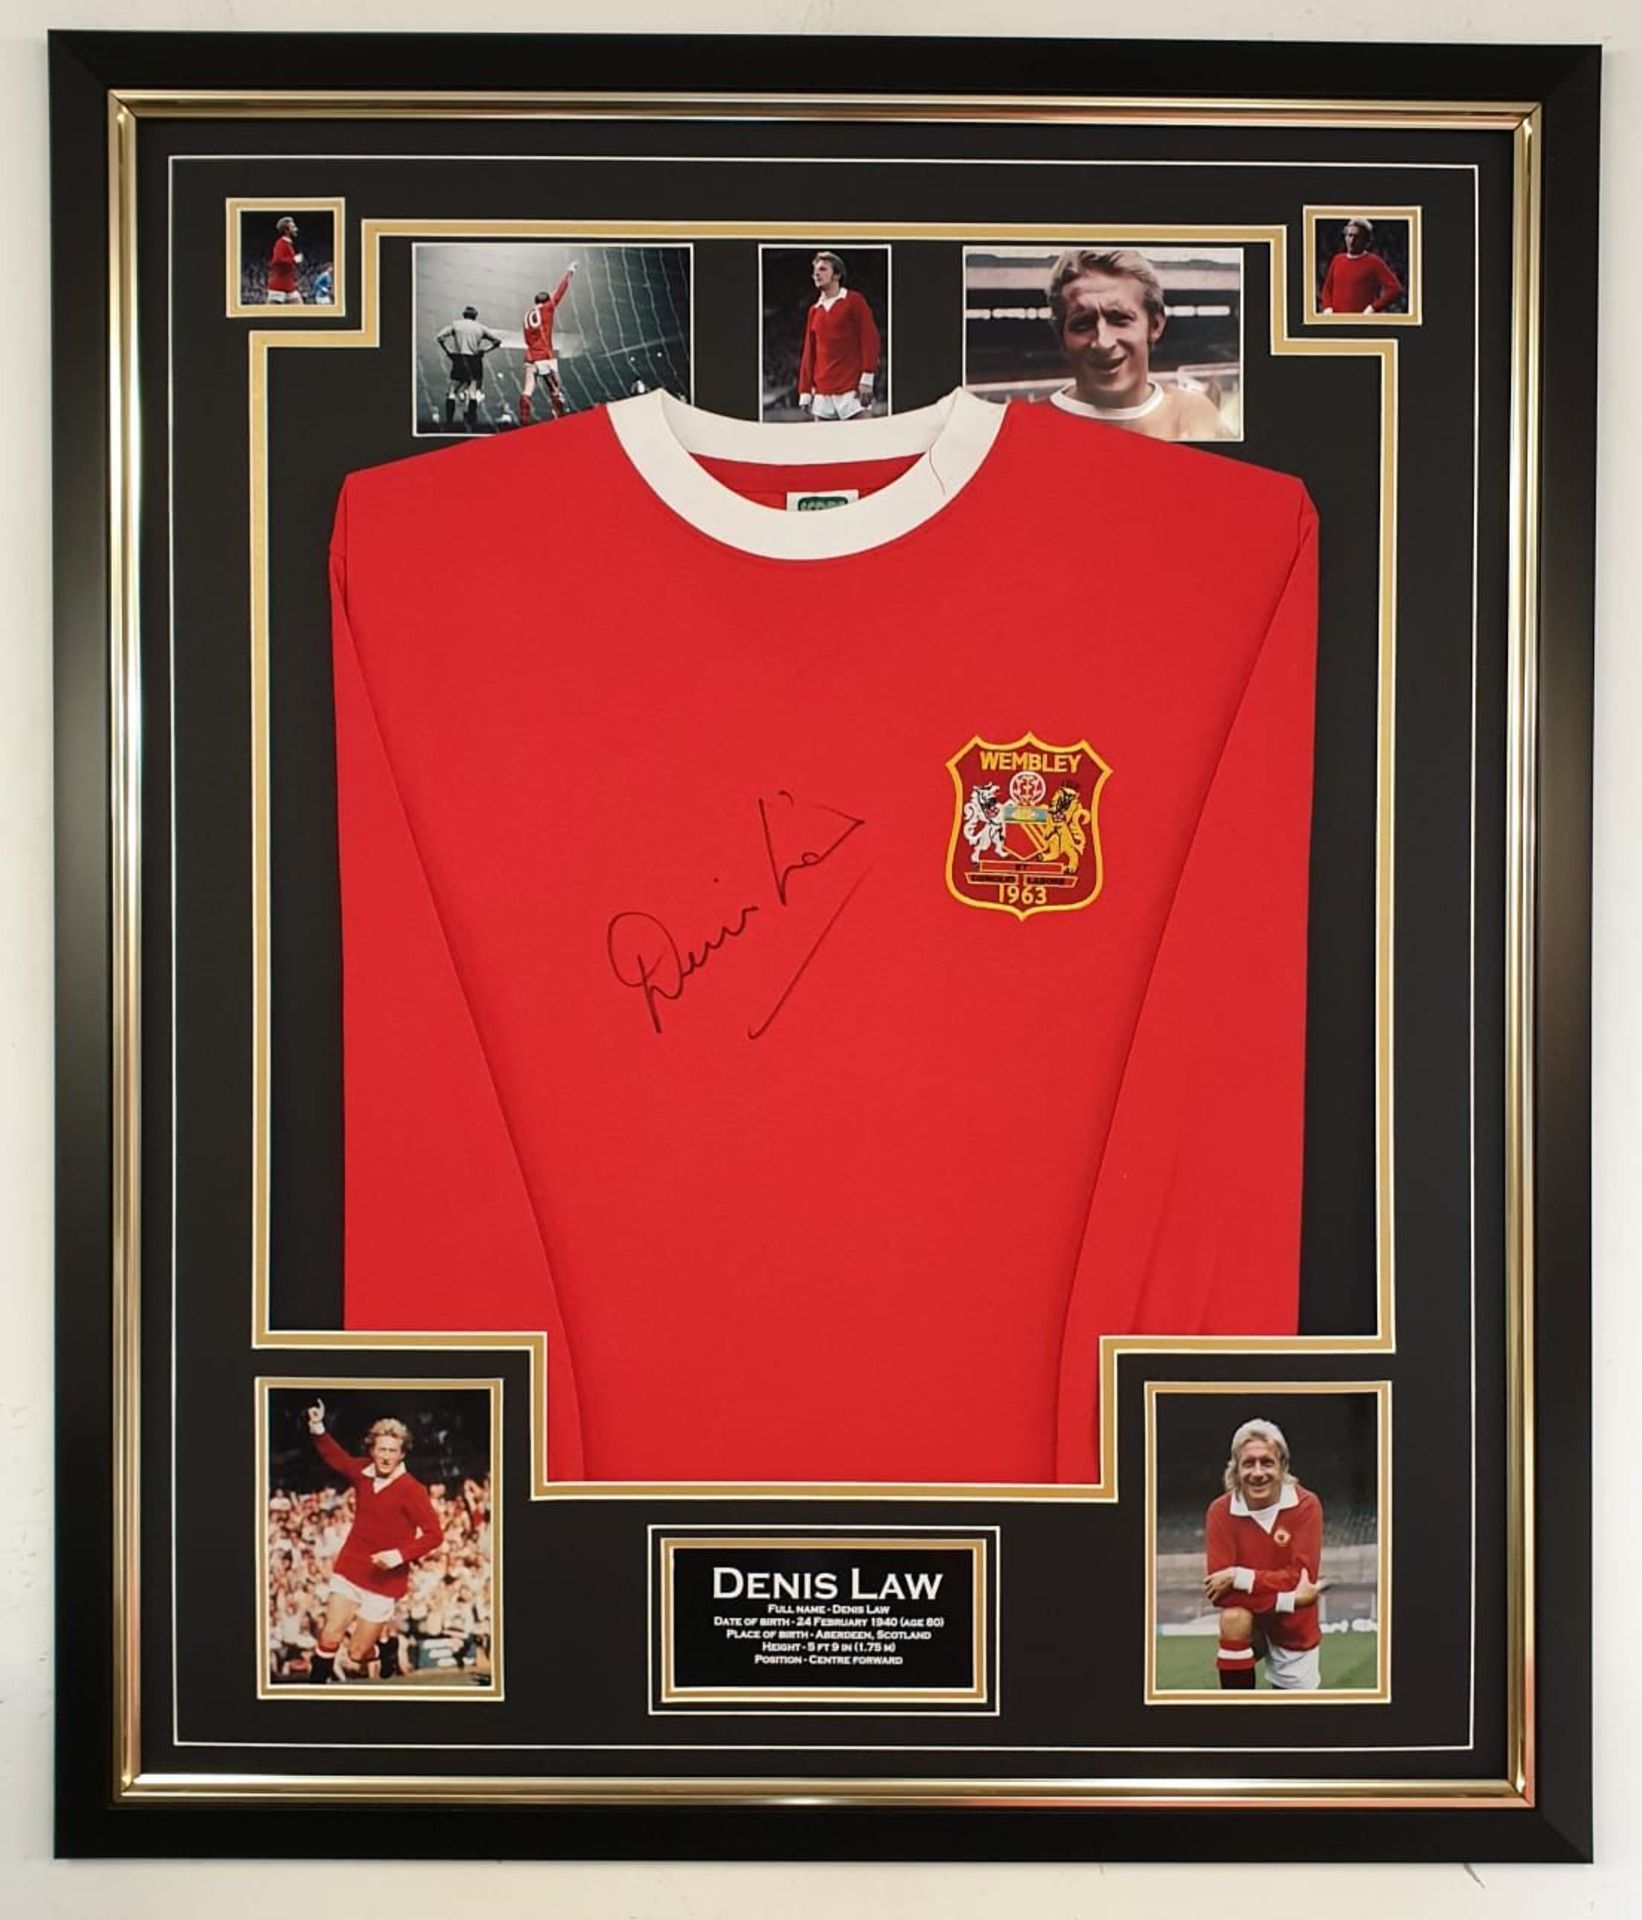 Denis Law signed framed Wembley 1963 Manchester United football shirt  ** A cost of £15 will be